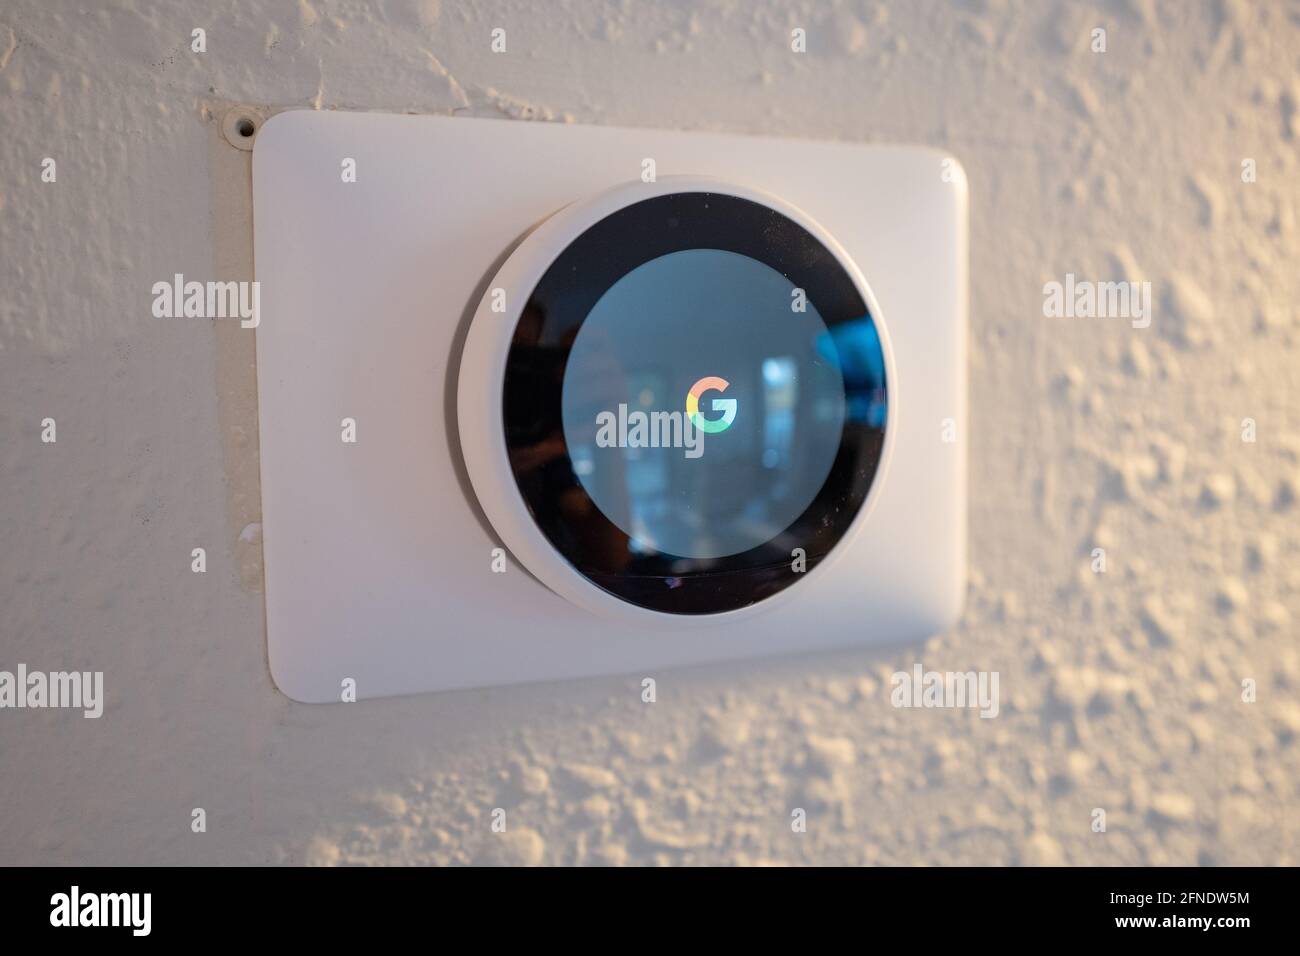 Nest Learning Thermostat displaying Google logo in smart home in Lafayette, California, January 17, 2021. () Stock Photo